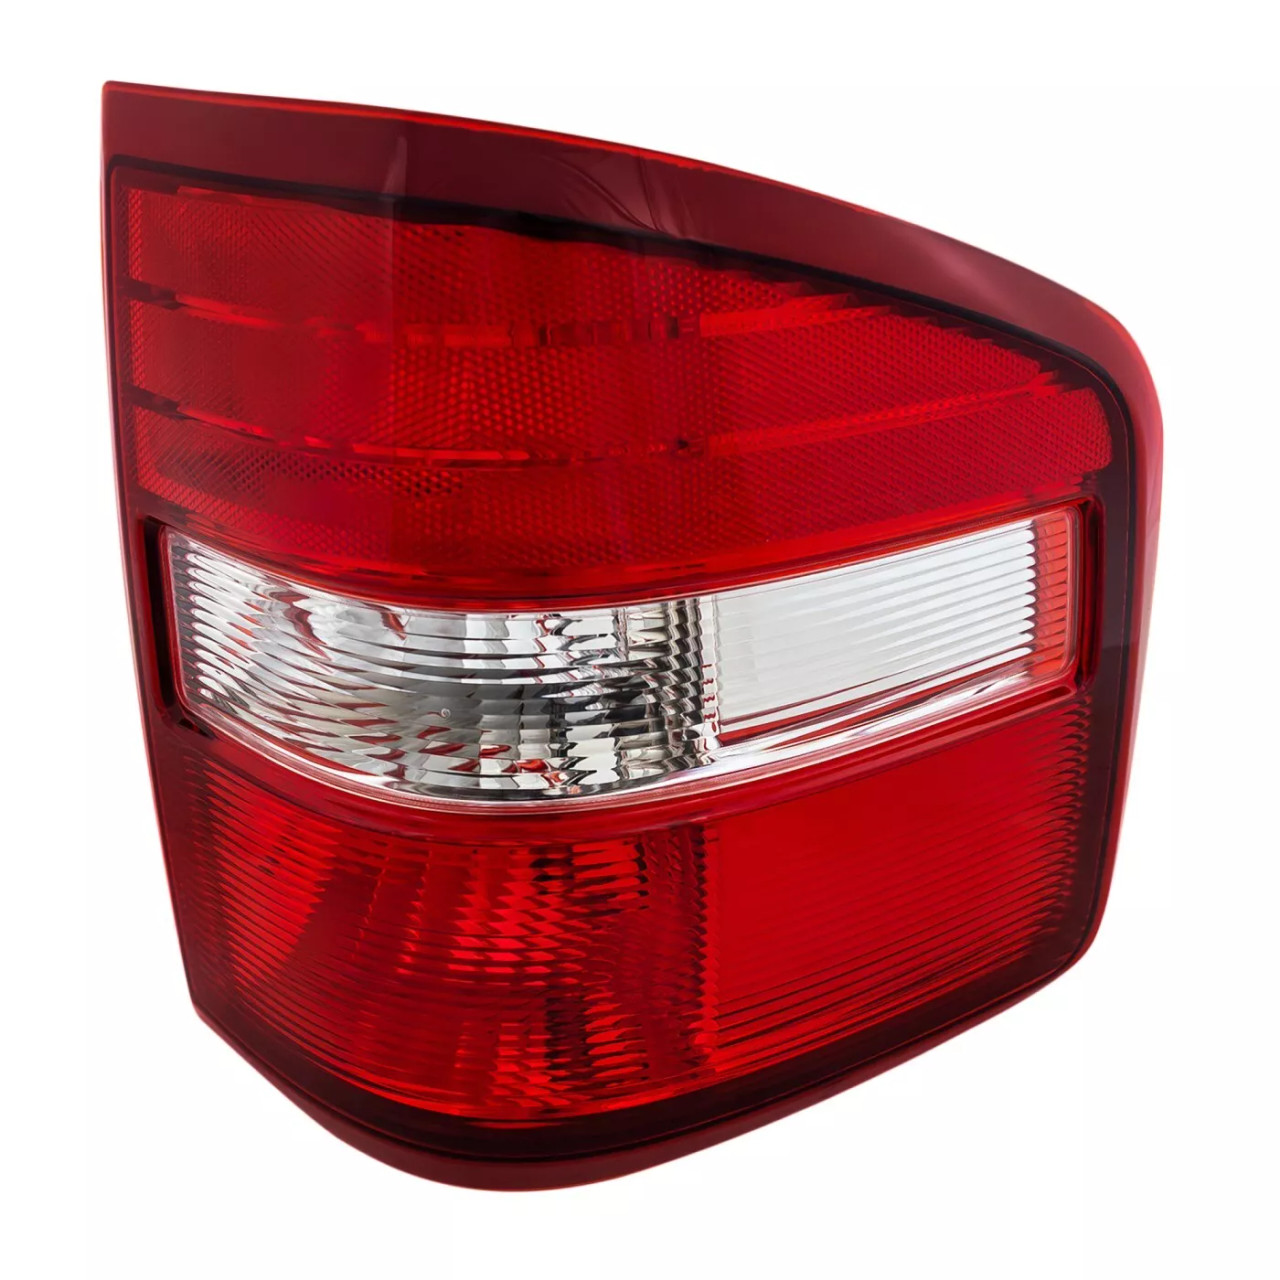 Tail Light for 2004-2009 Ford F-150 RH Flareside New Body Style